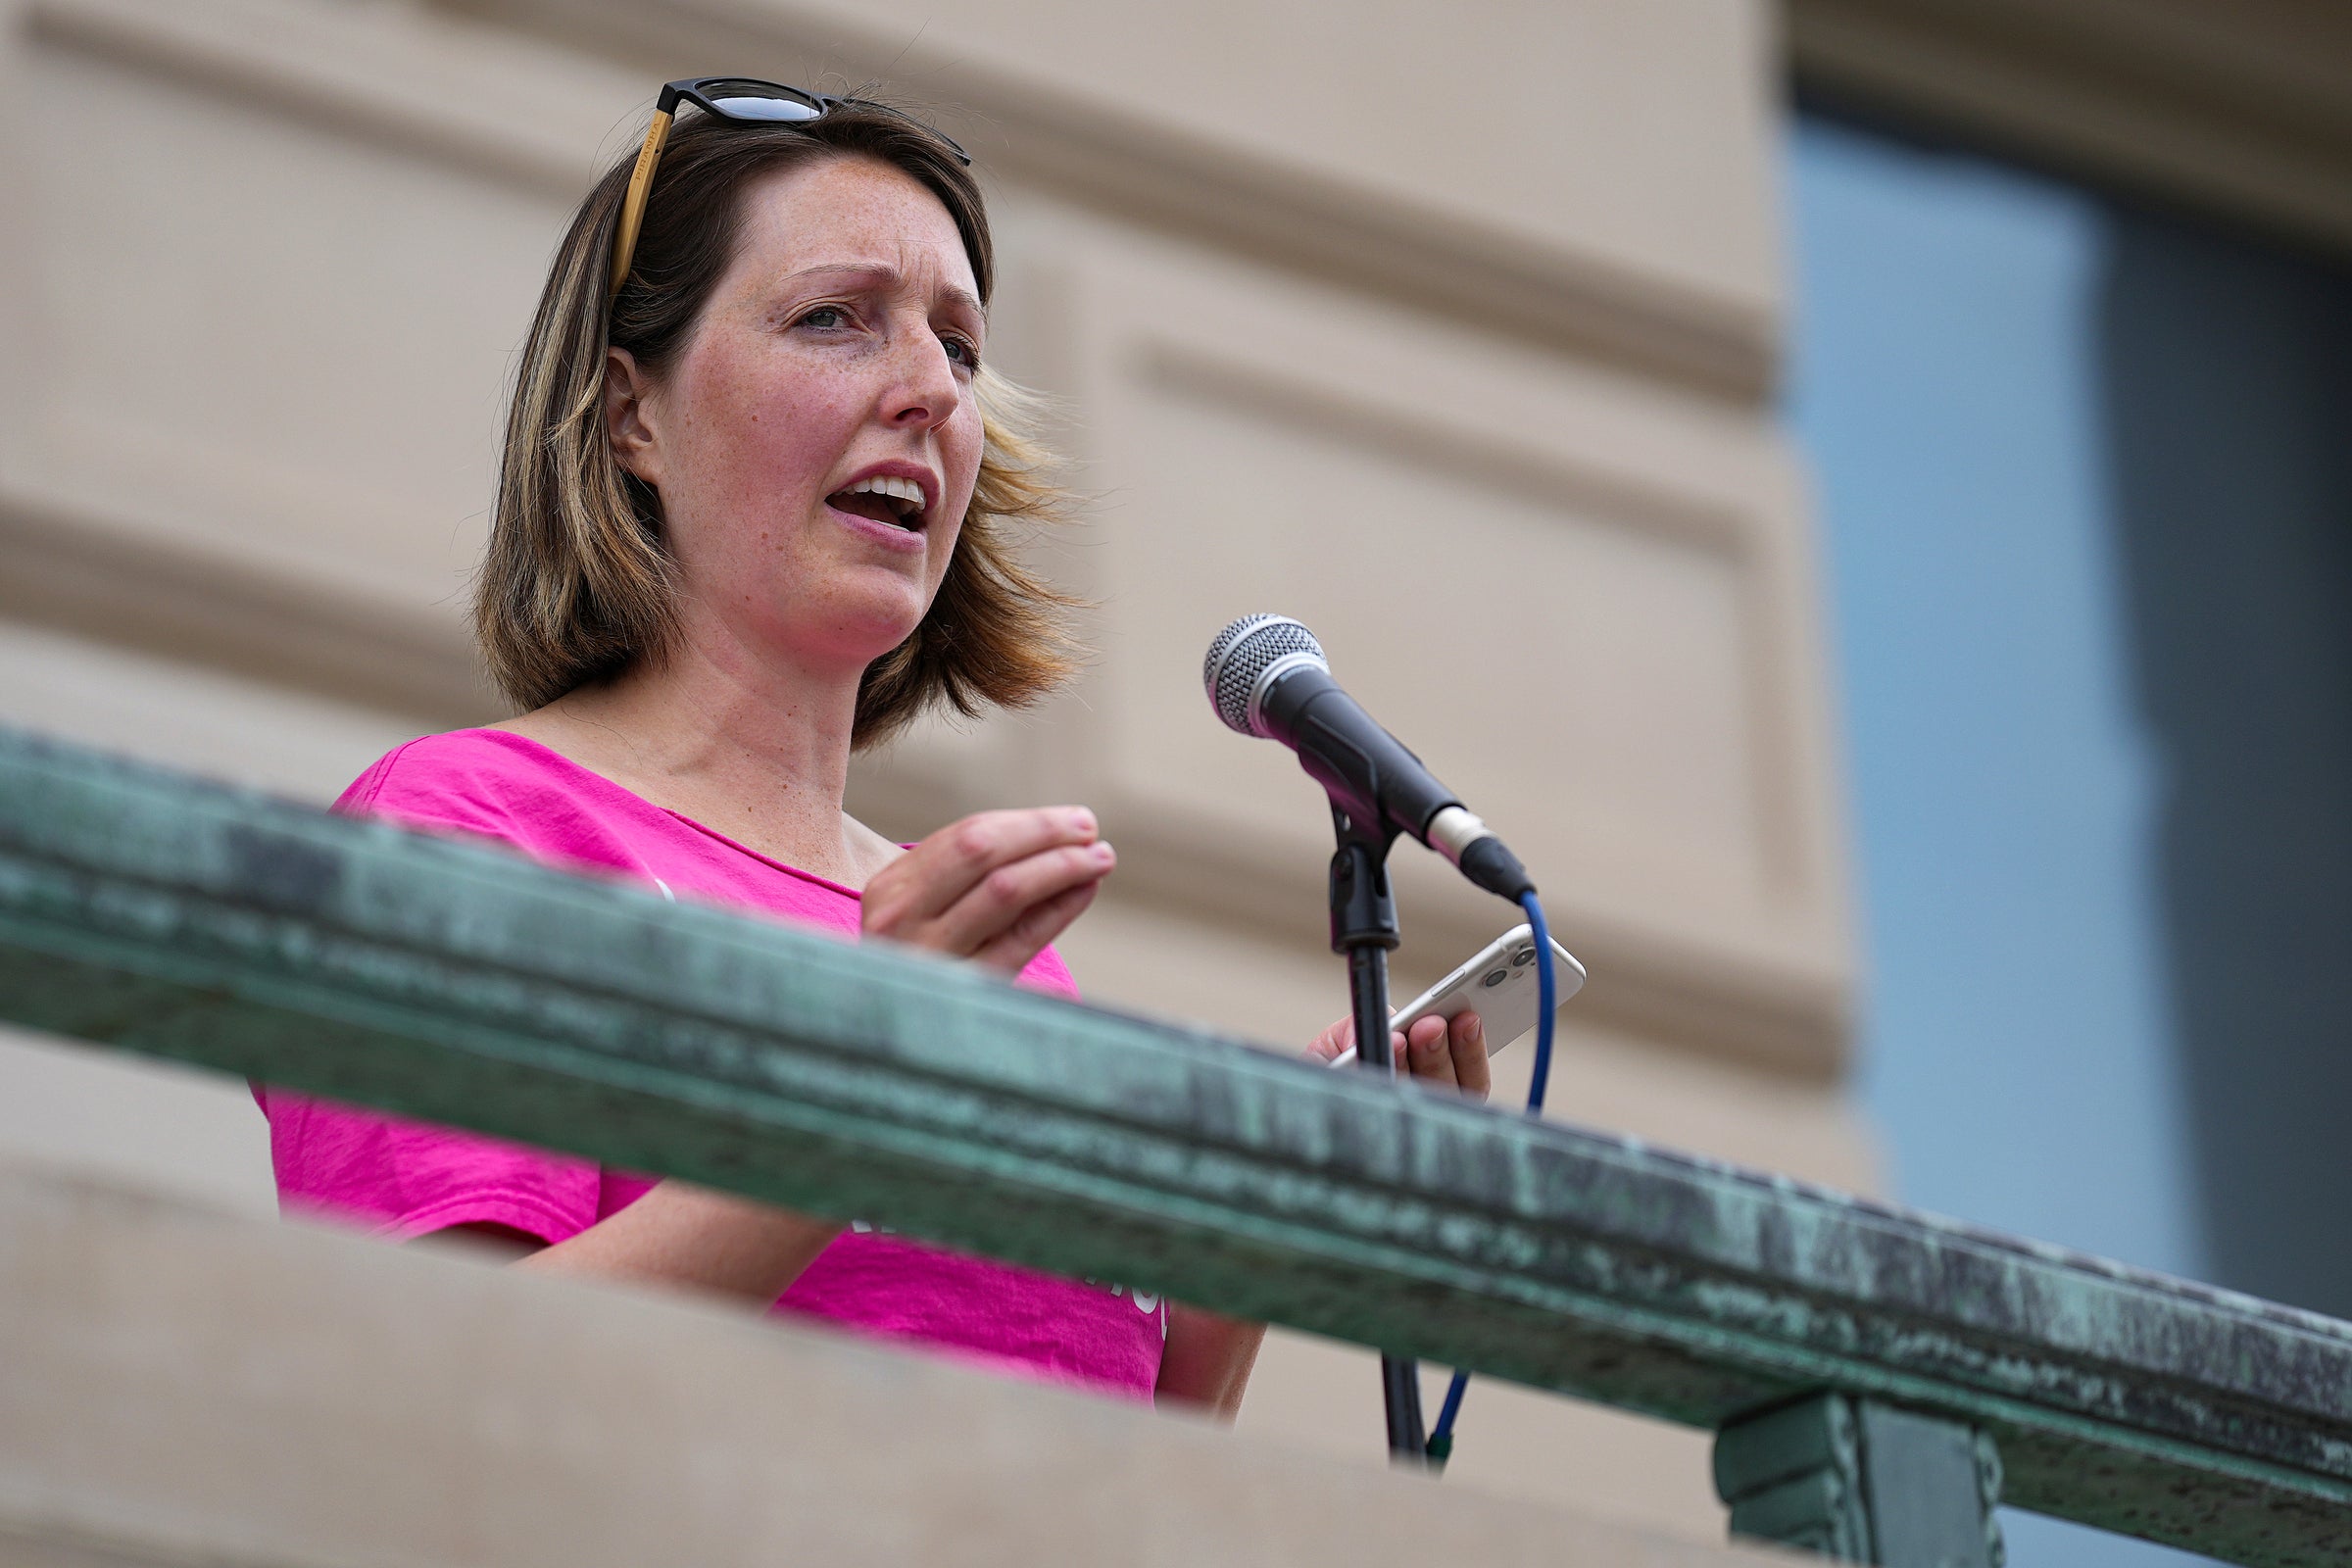 Dr Caitlin Bernard, a reproductive healthcare provider, speaks during an abortion rights rally on June 25, 2022, at the Indiana Statehouse in Indianapolis